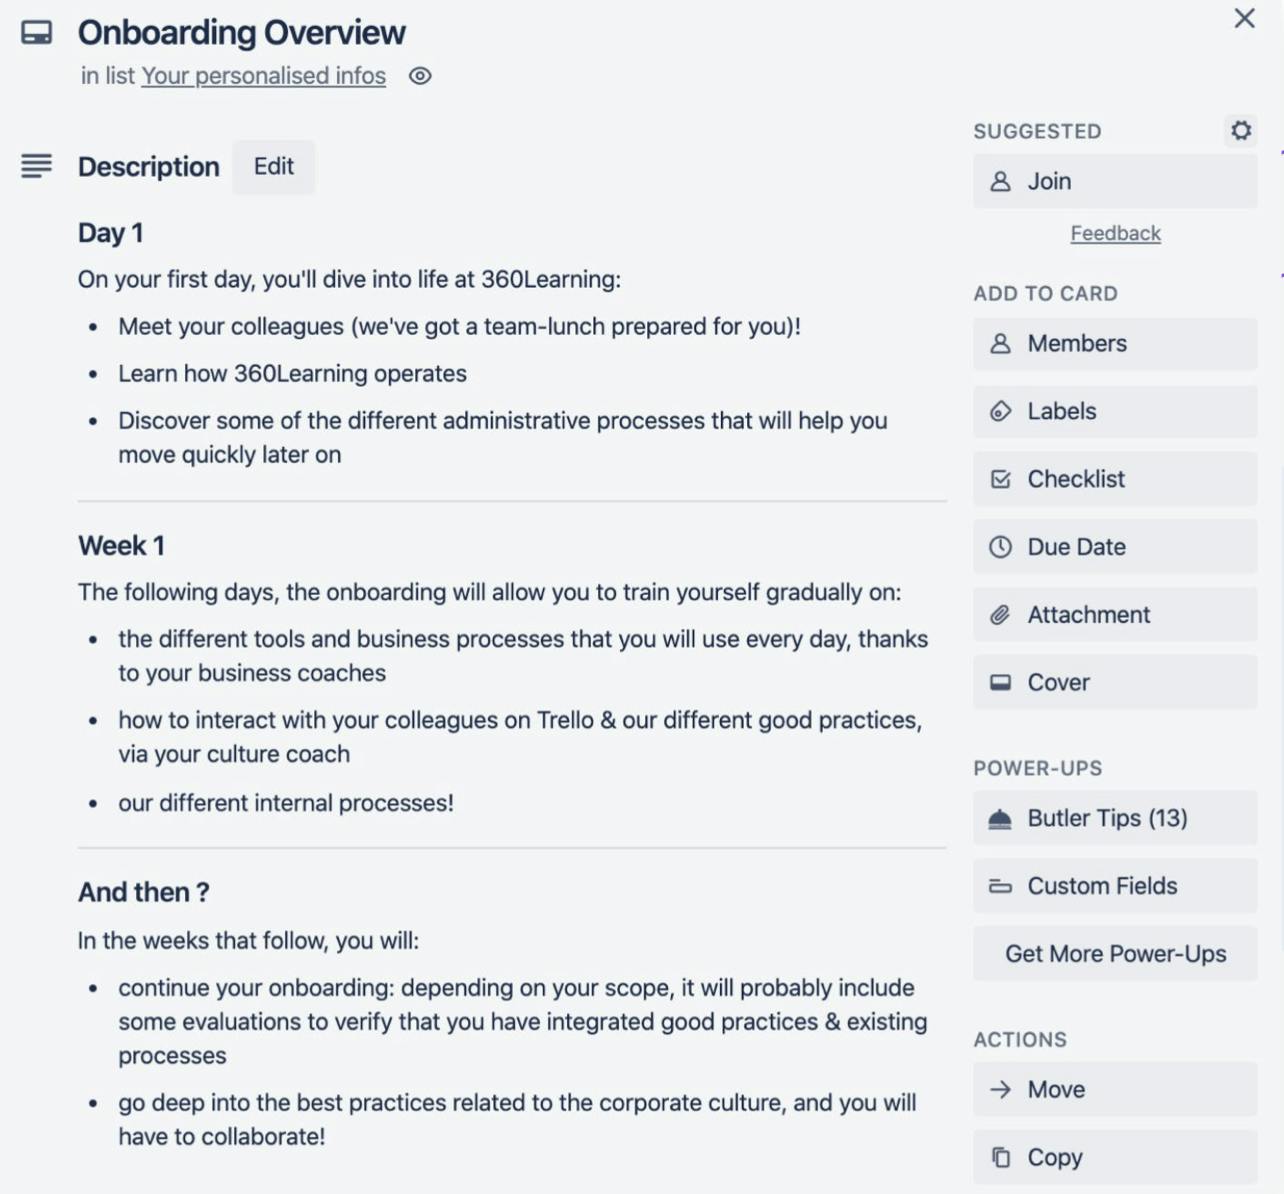 32 Onboarding Templates and Checklists to Design Great NewHire Experiences